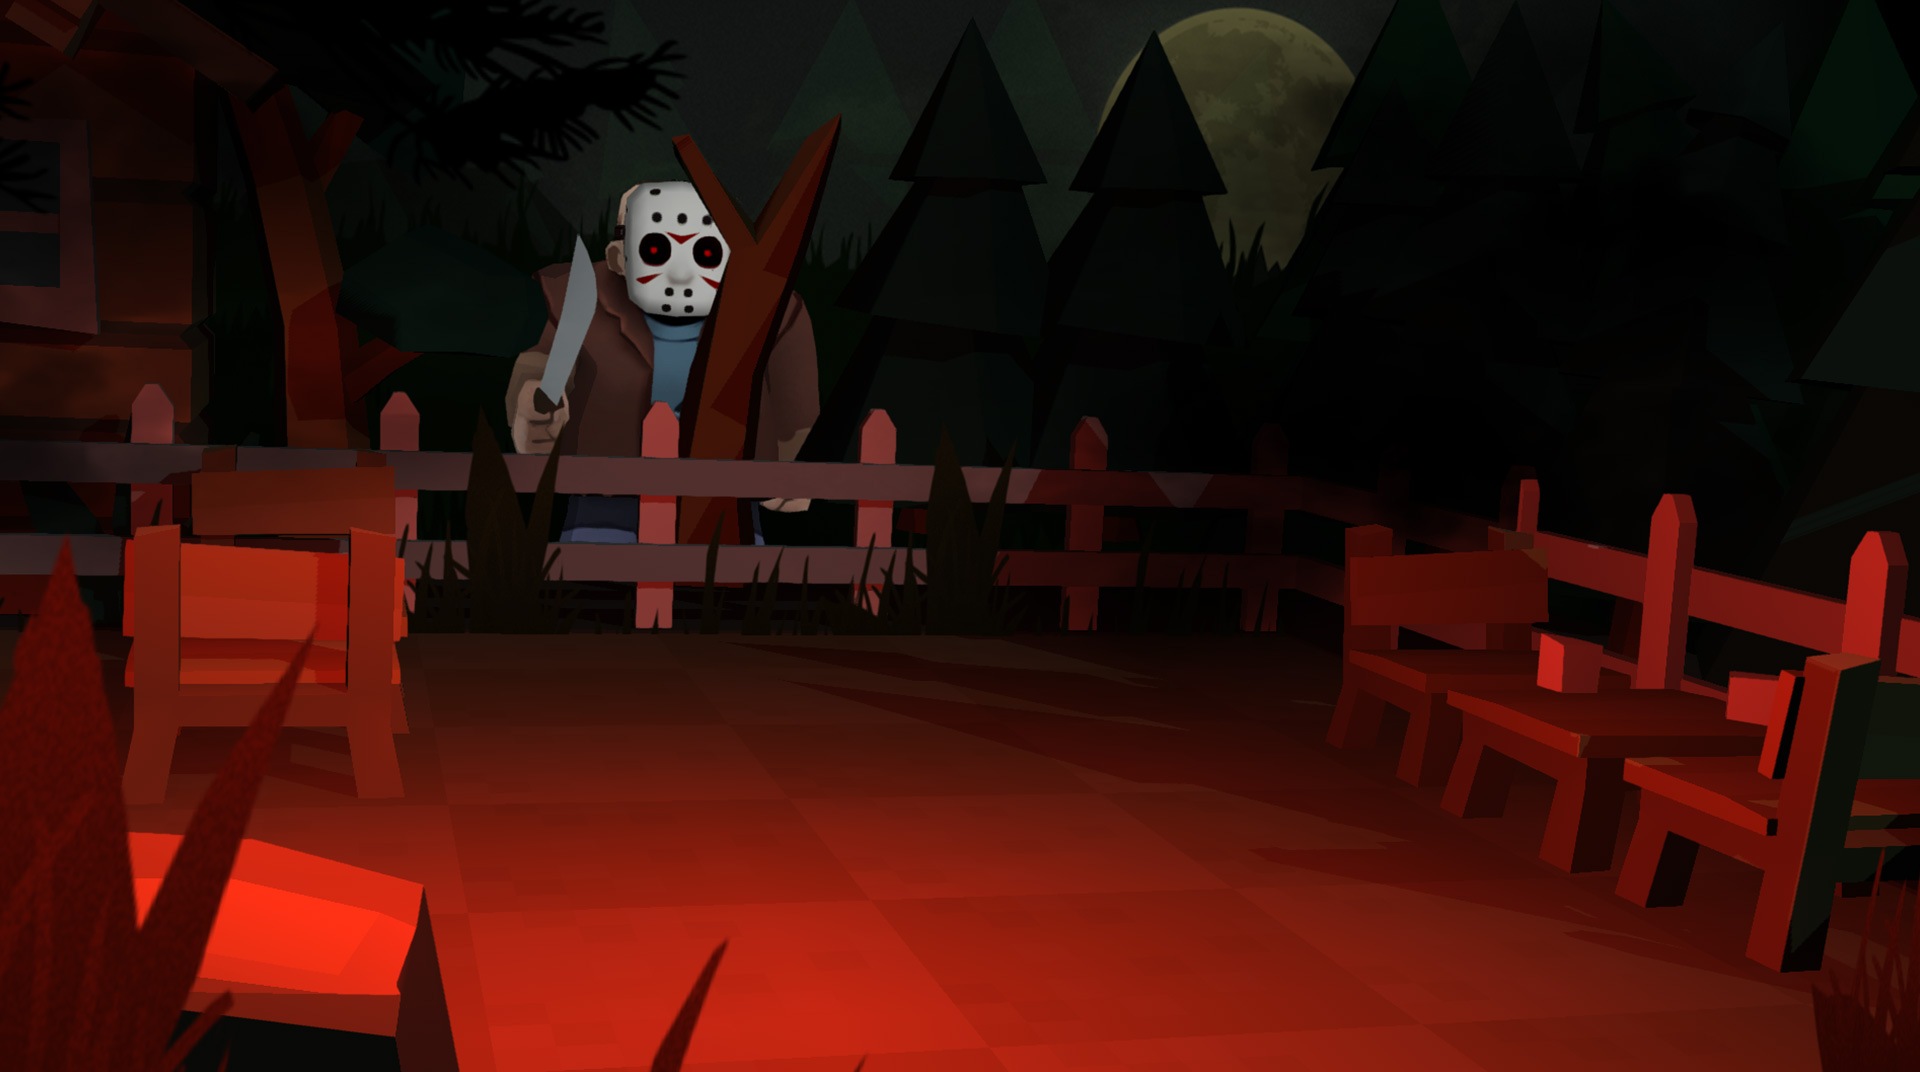 Inefficient curse Moral education Download & Play Friday the 13th: Killer Puzzle on PC & Mac (Emulator)